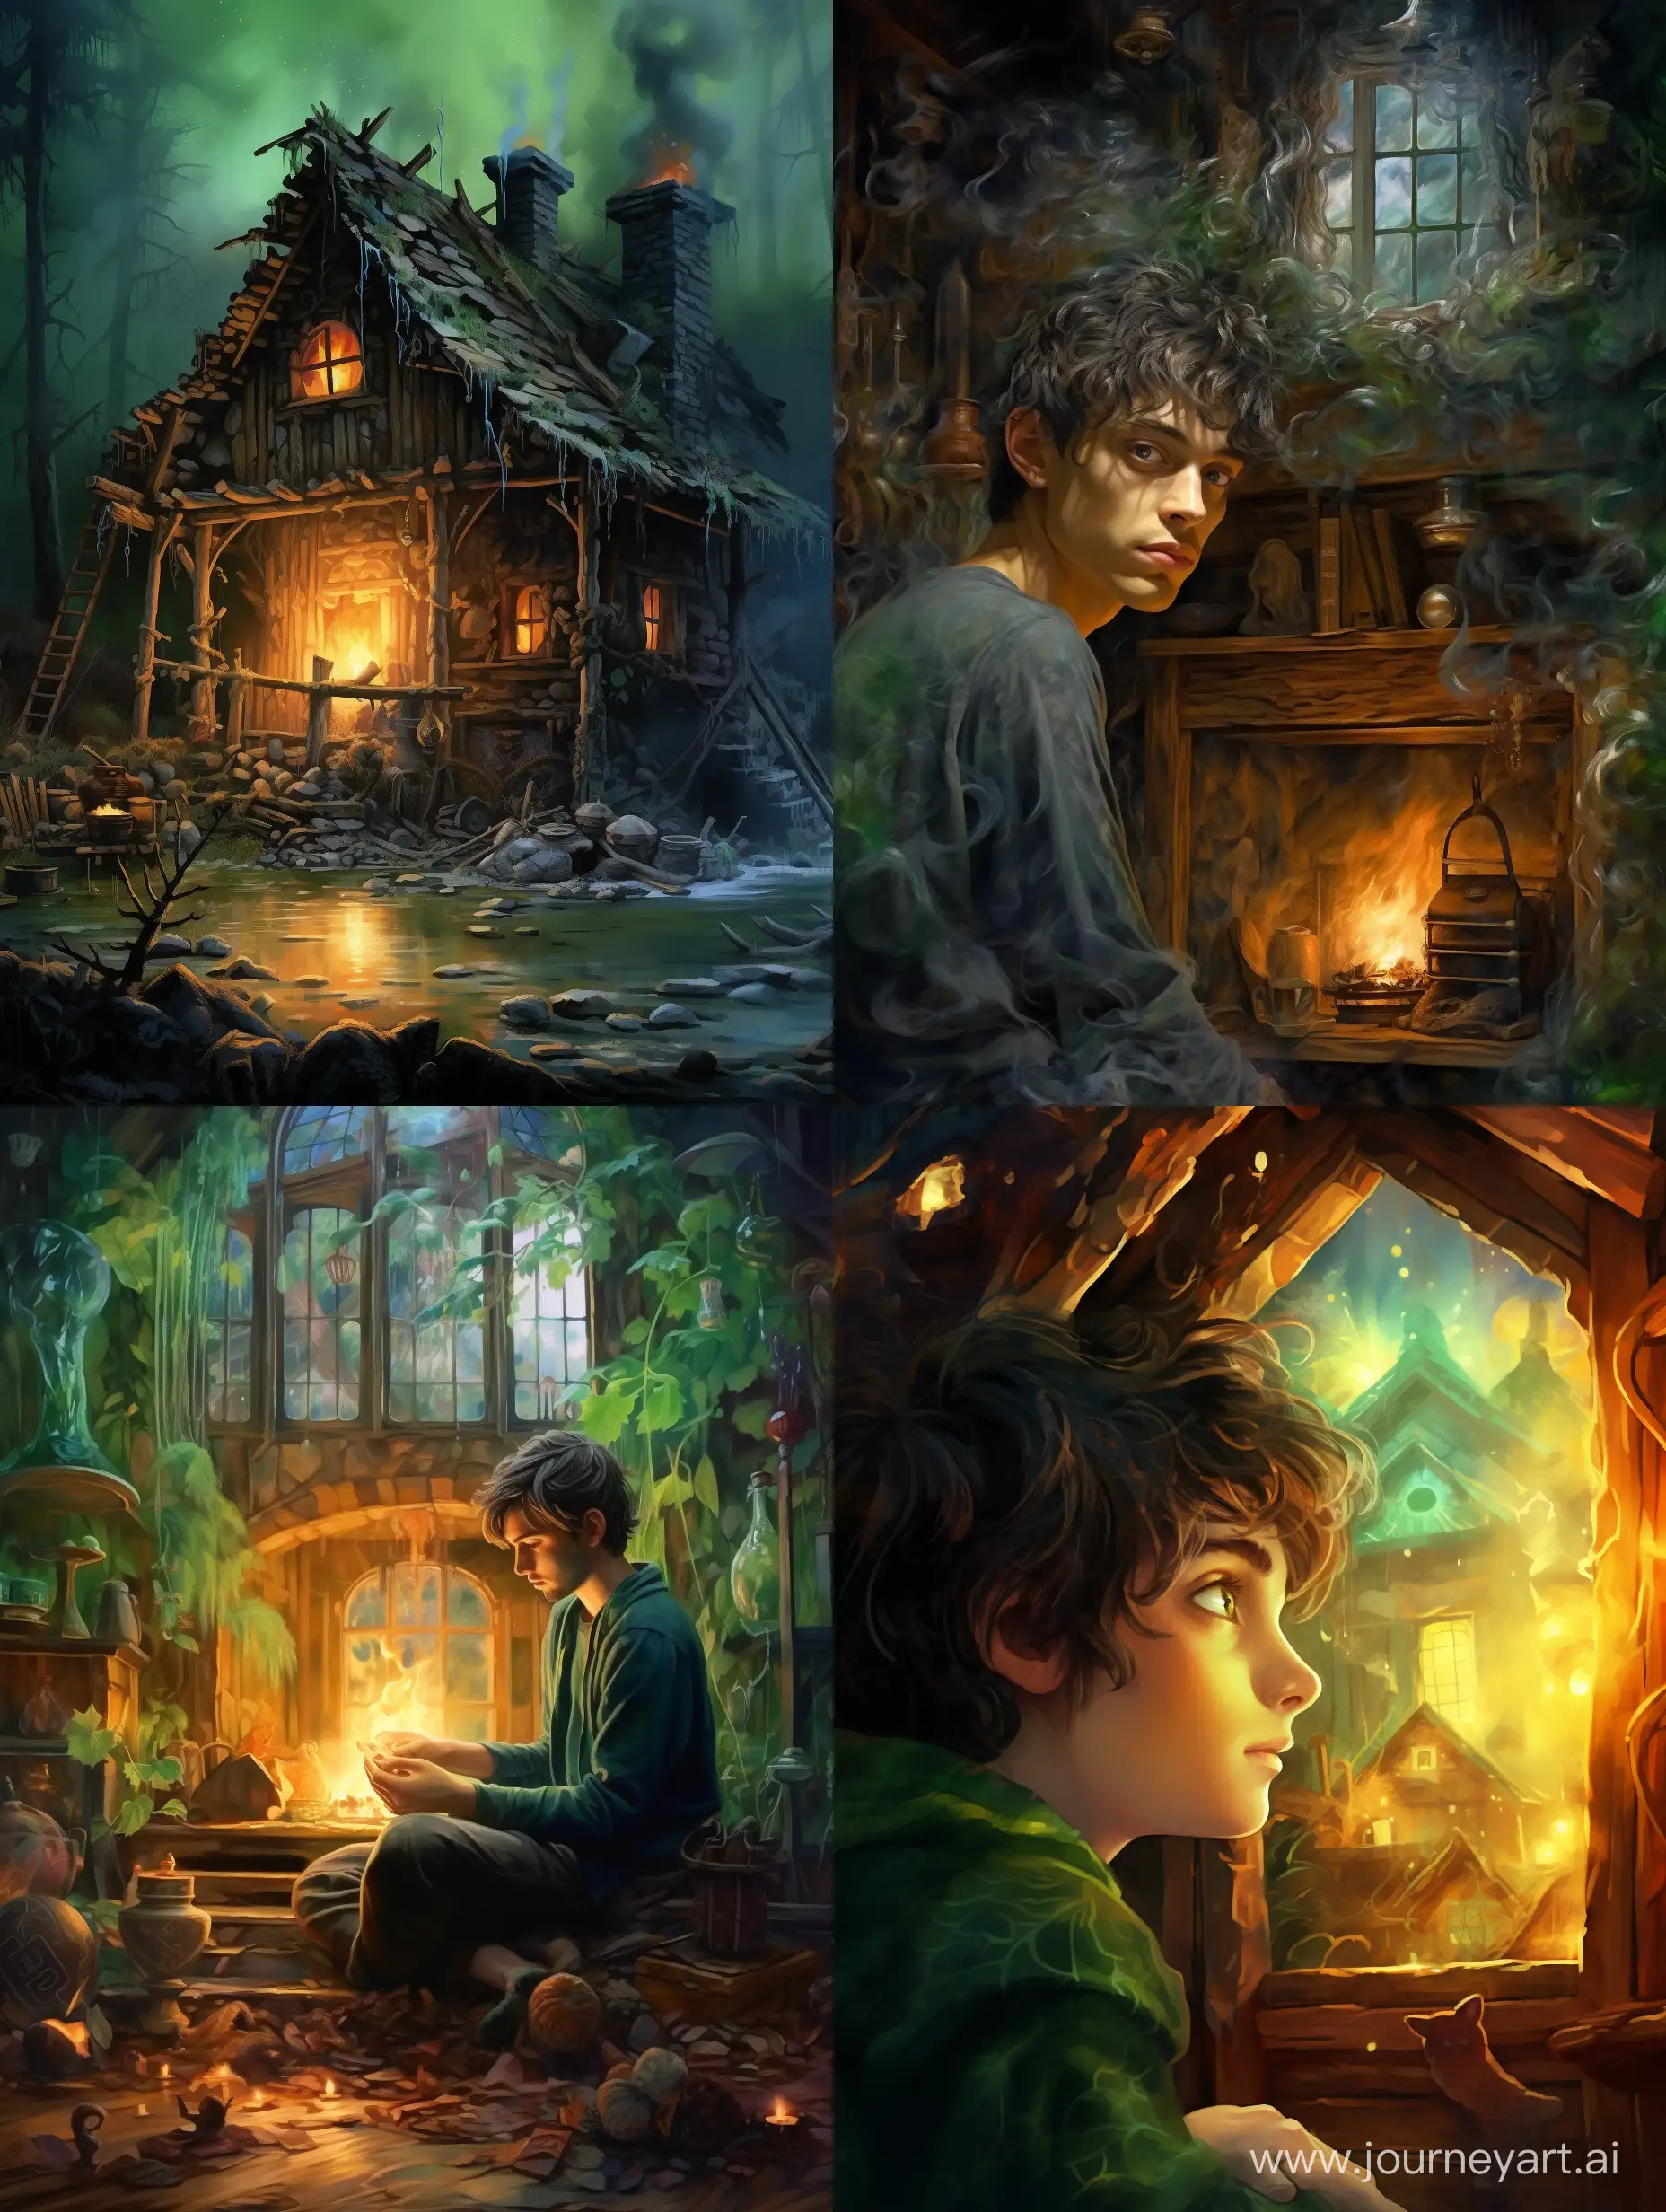 Enchanting-Log-Cabin-Scene-Photorealistic-Oil-Painting-with-BrownEyed-Young-Man